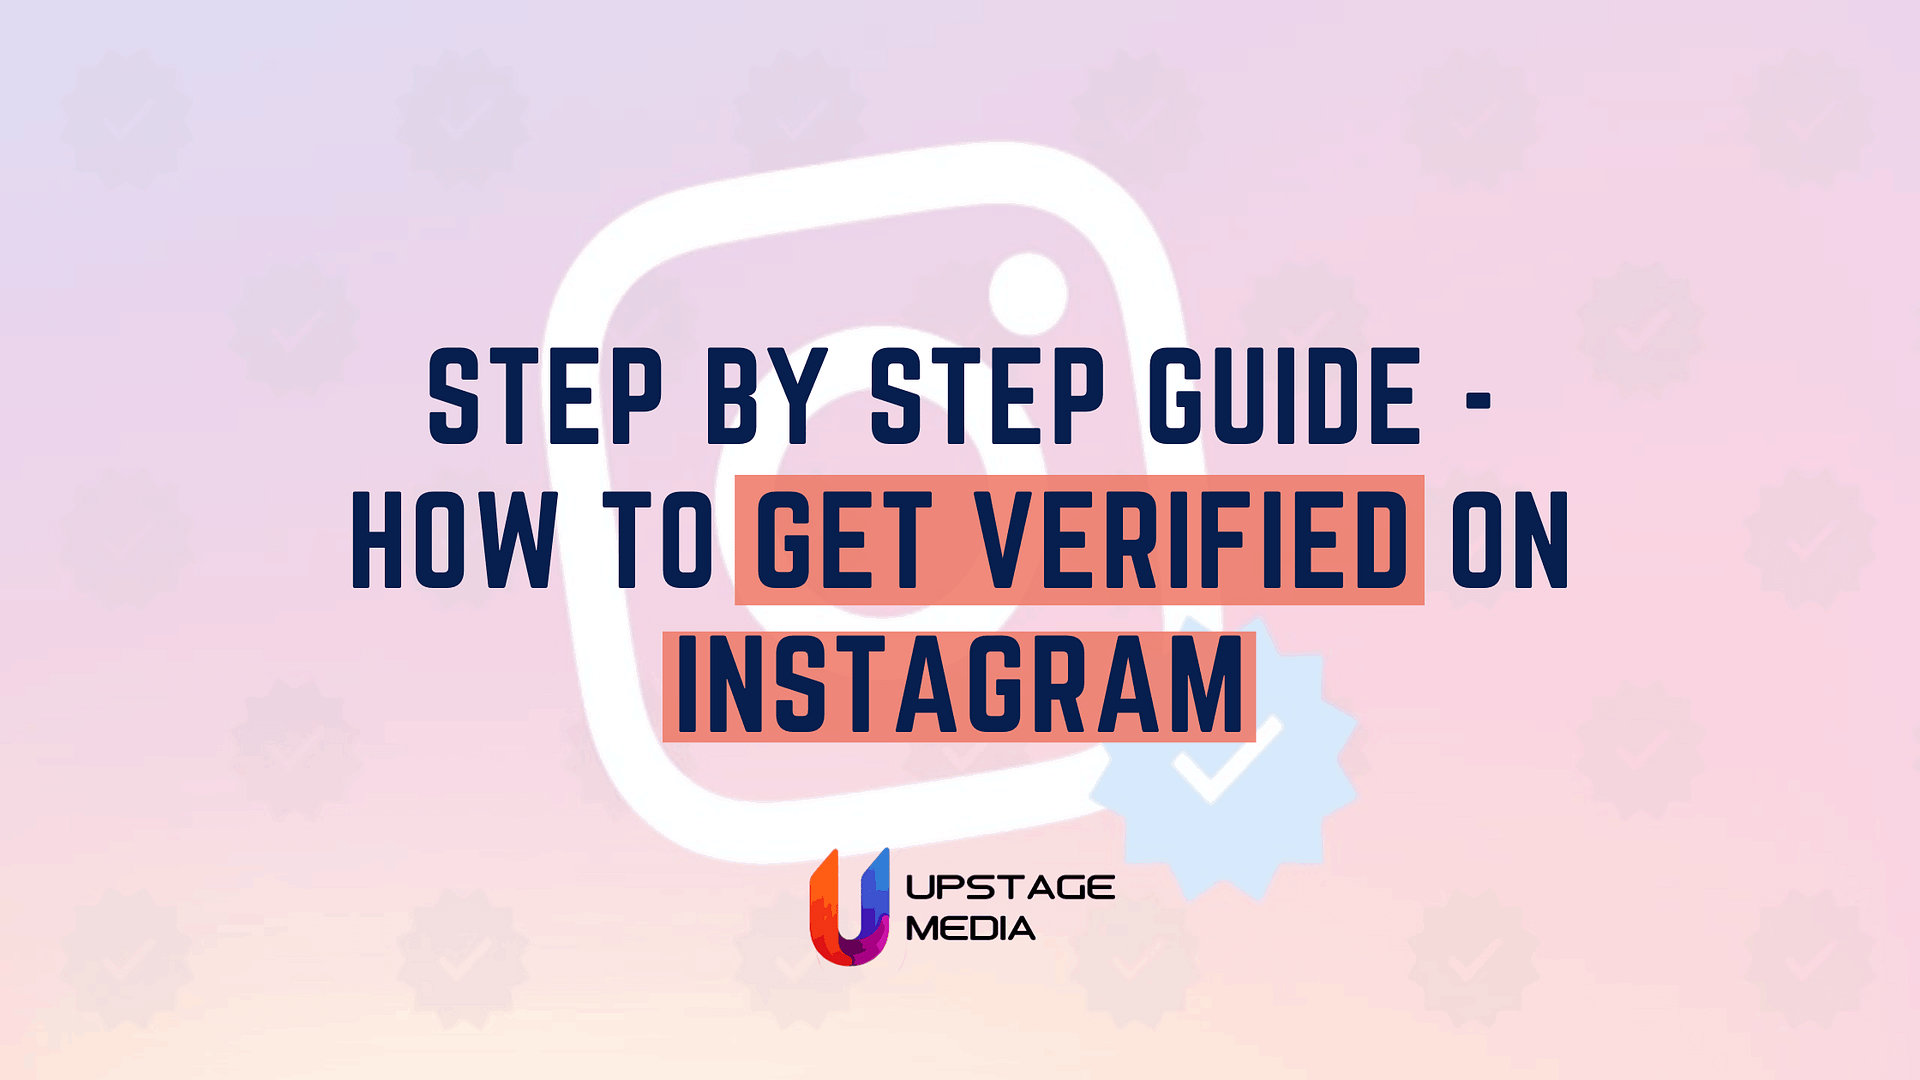 How to Verify an Instagram Account: A Step-By-Step Guide